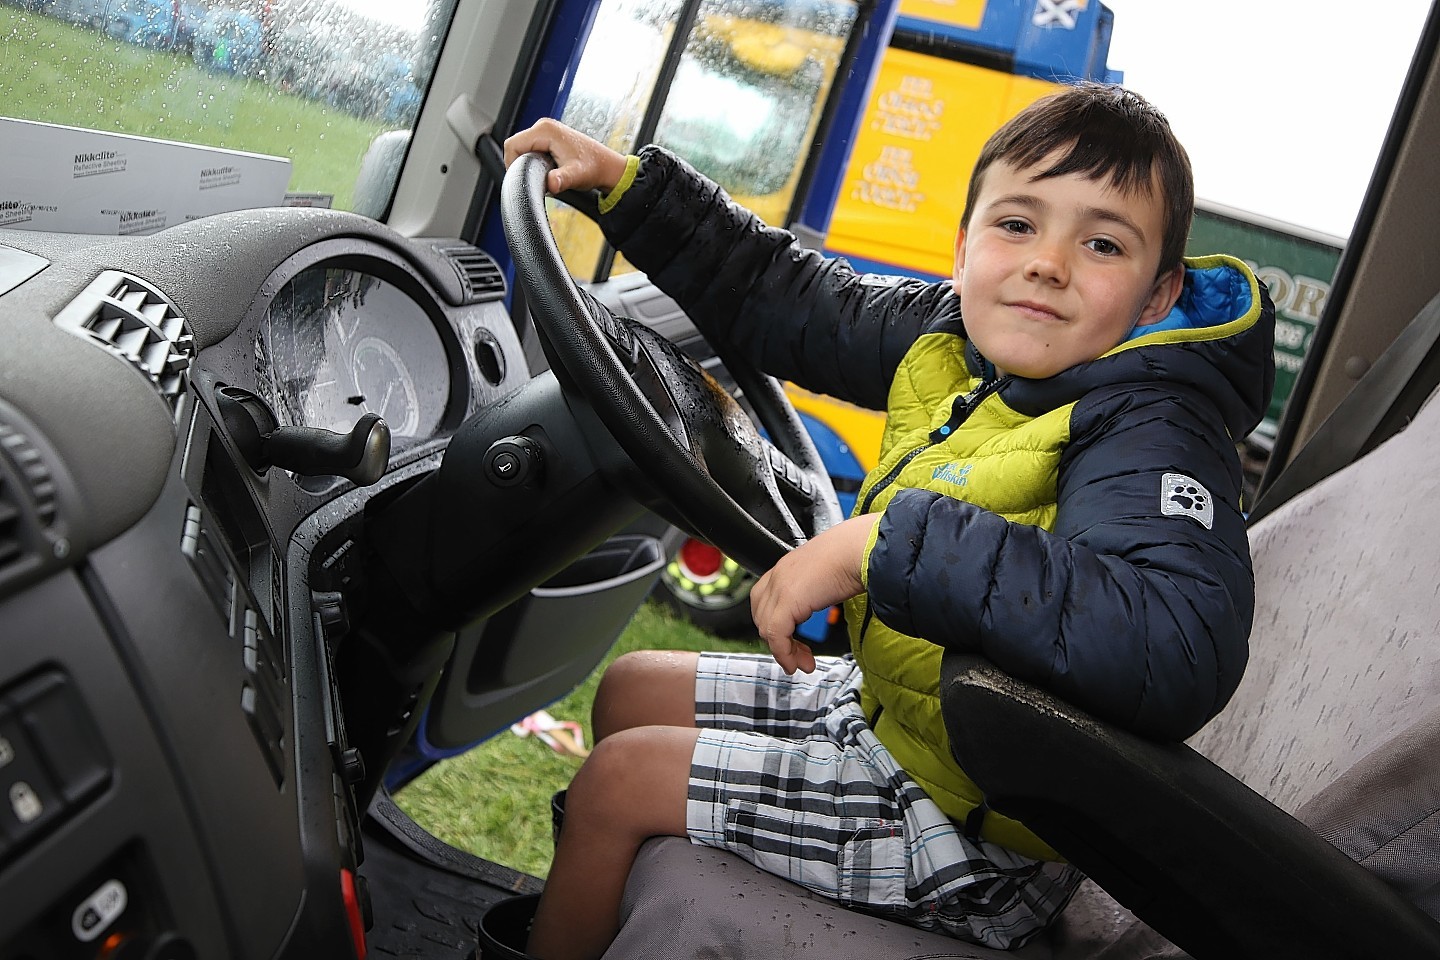 Truck-loving Daniel Frain, 7, from North Kessock gets to grips with one of the showpiece vehicles.